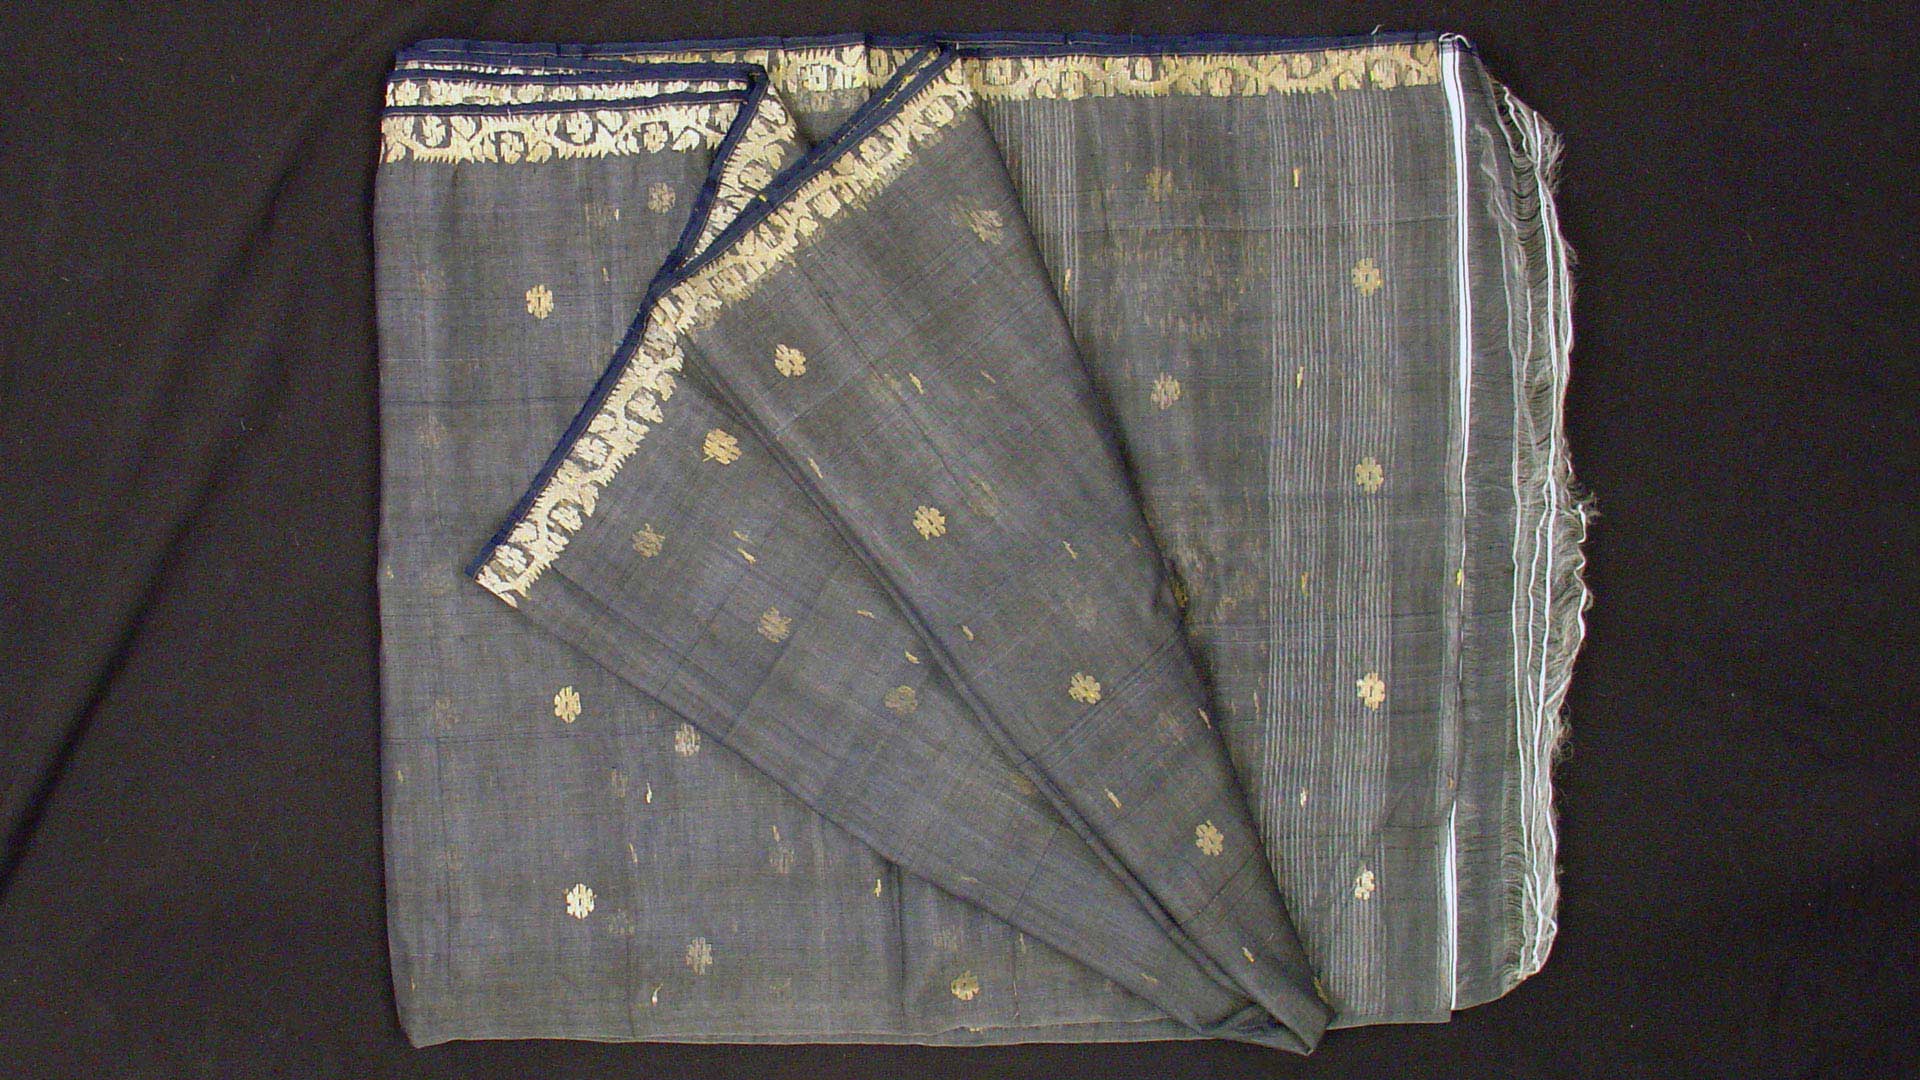 Grey sari with golden border and minor dotted pattern